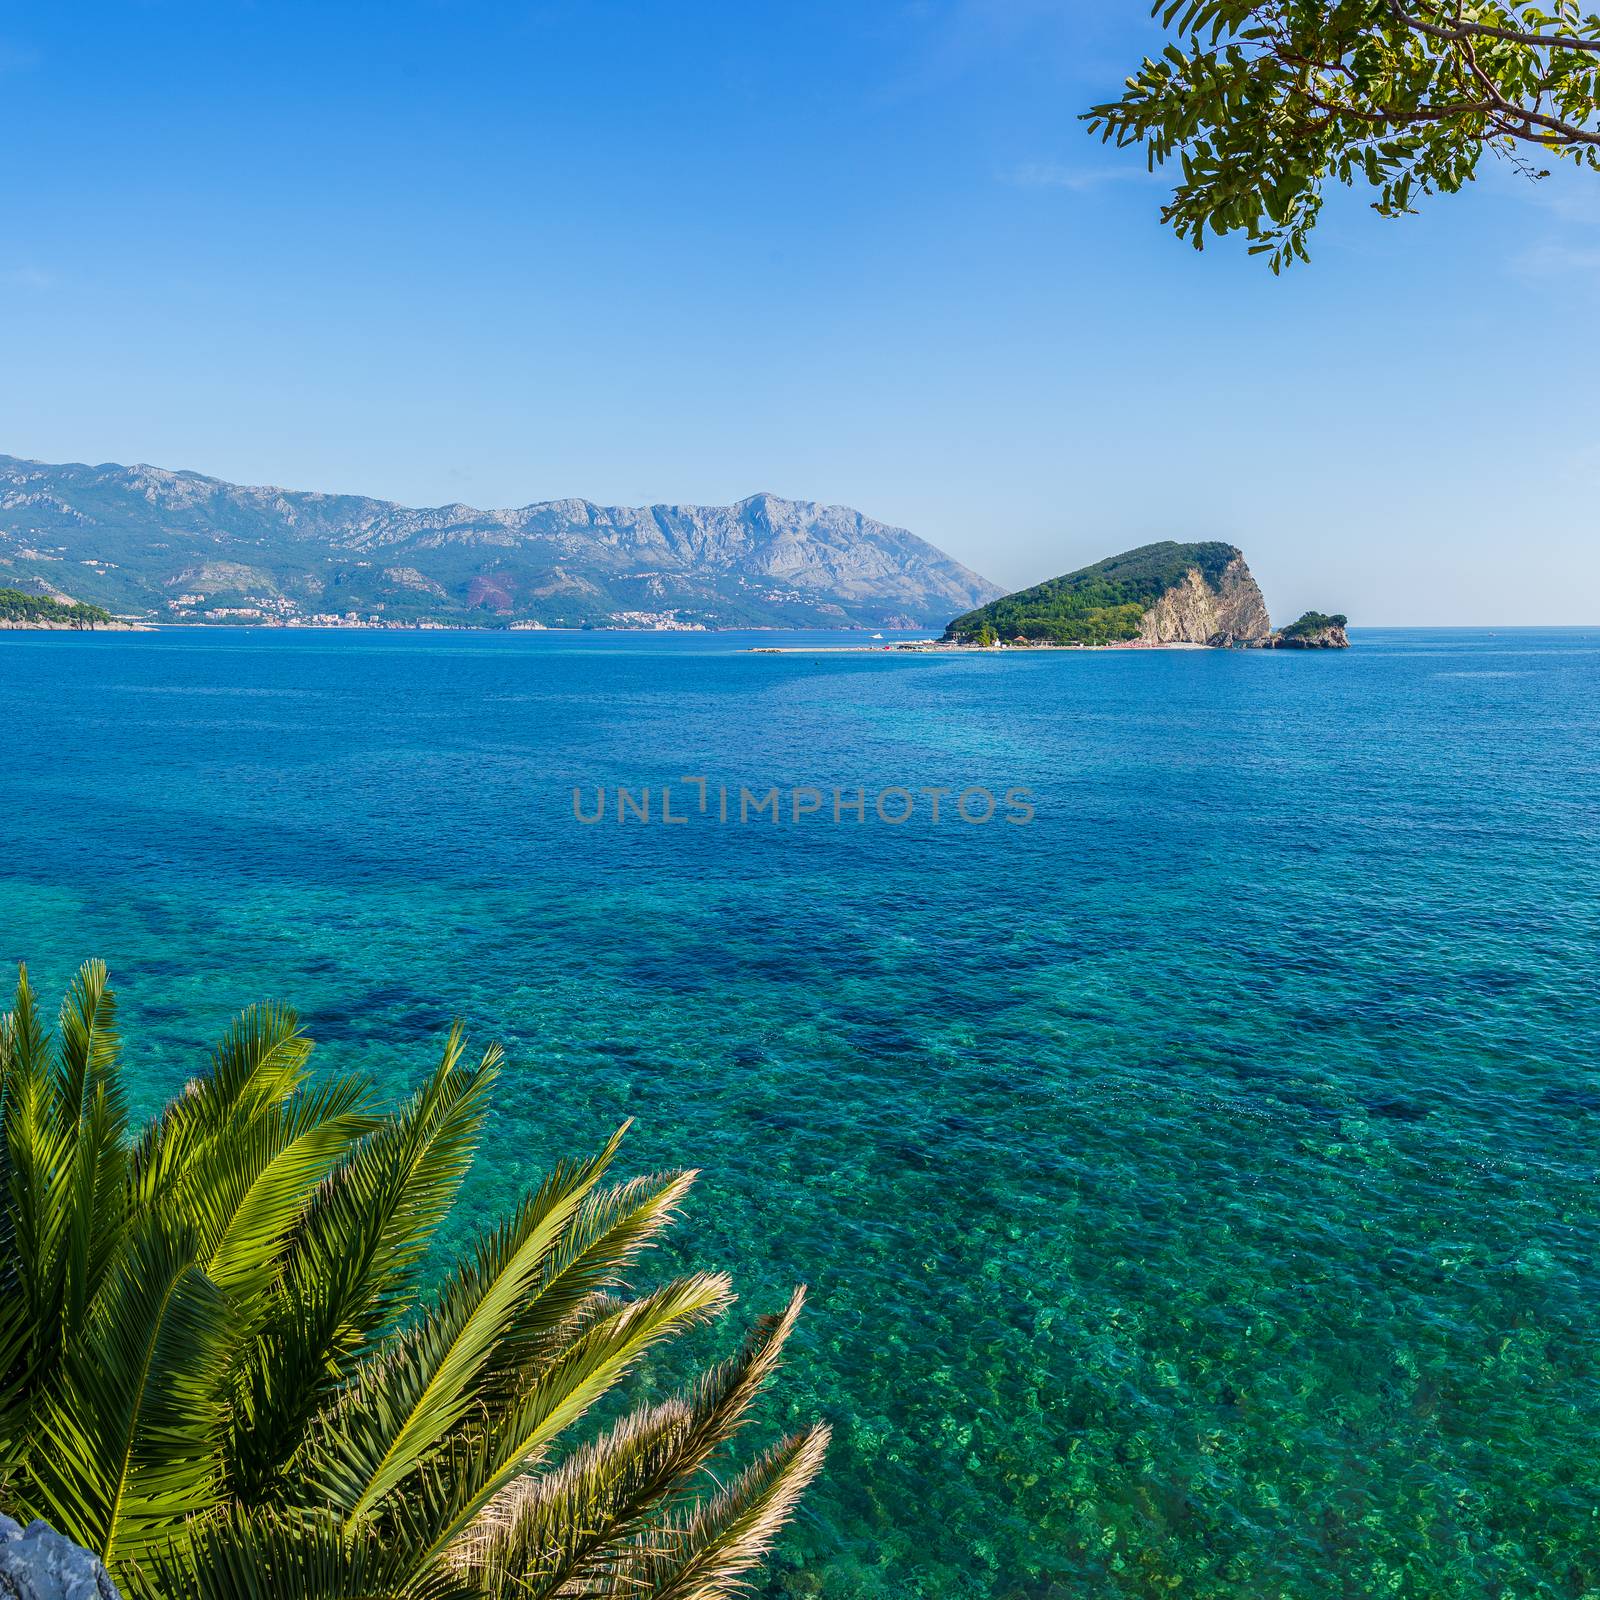 St. Nicholas Island in the bay near the town of Budva in Montenegro framed by green palm leaves